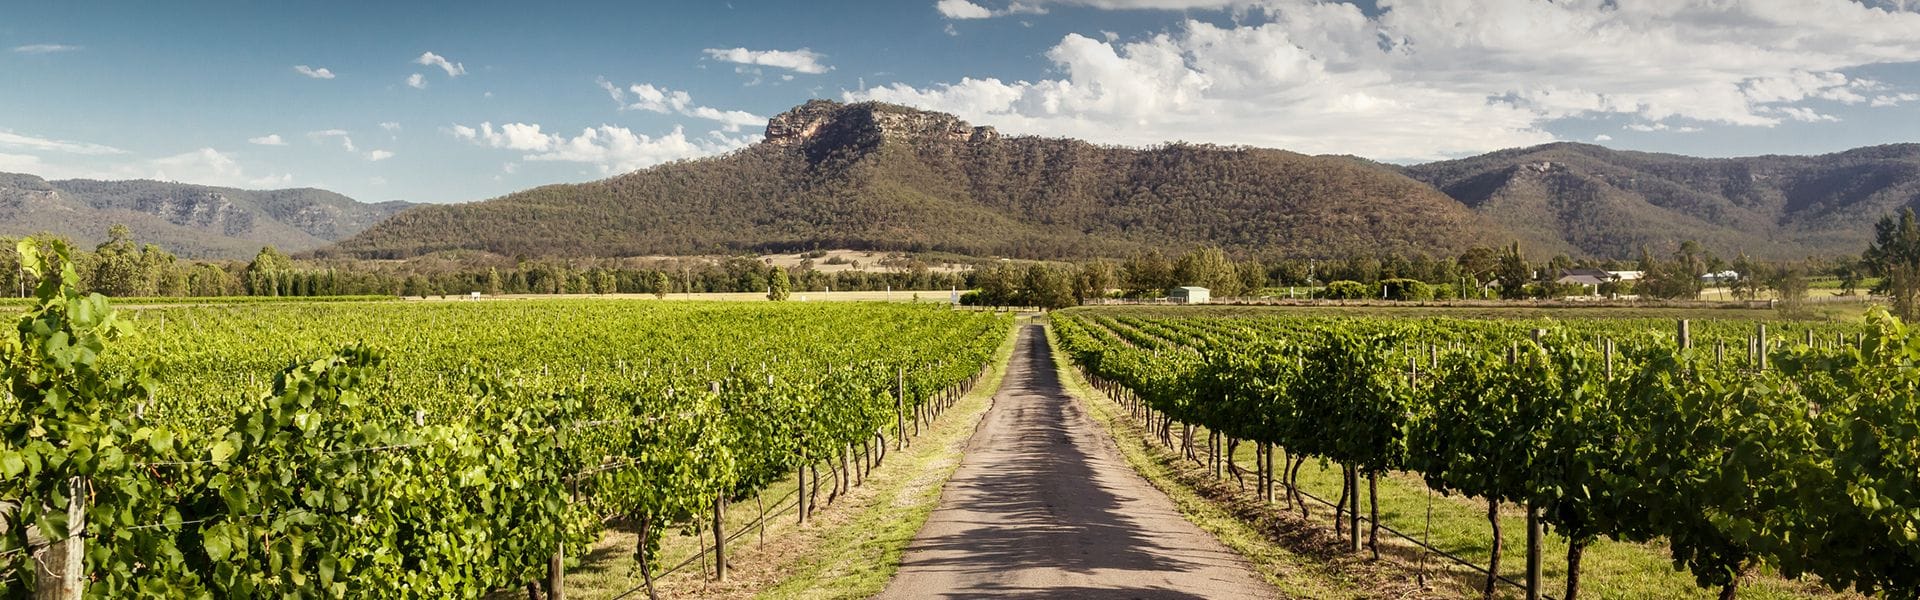 hunter valley wine tour pick up newcastle